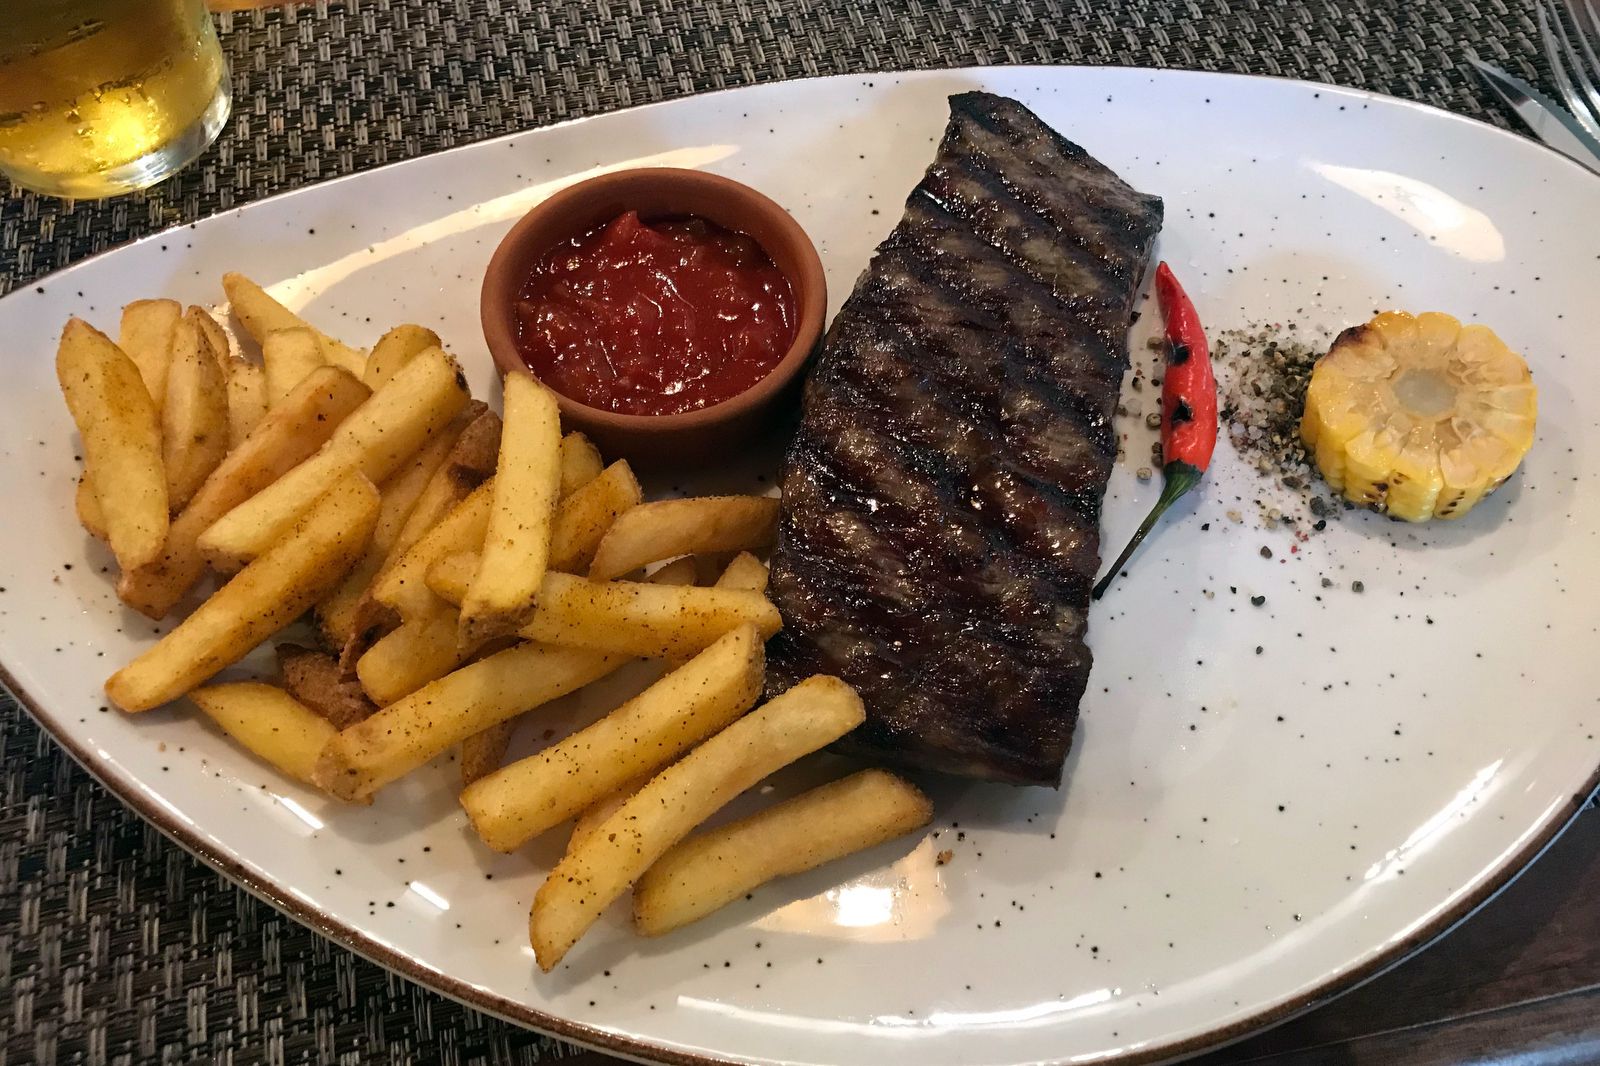 Steak and chips have never tasted so good